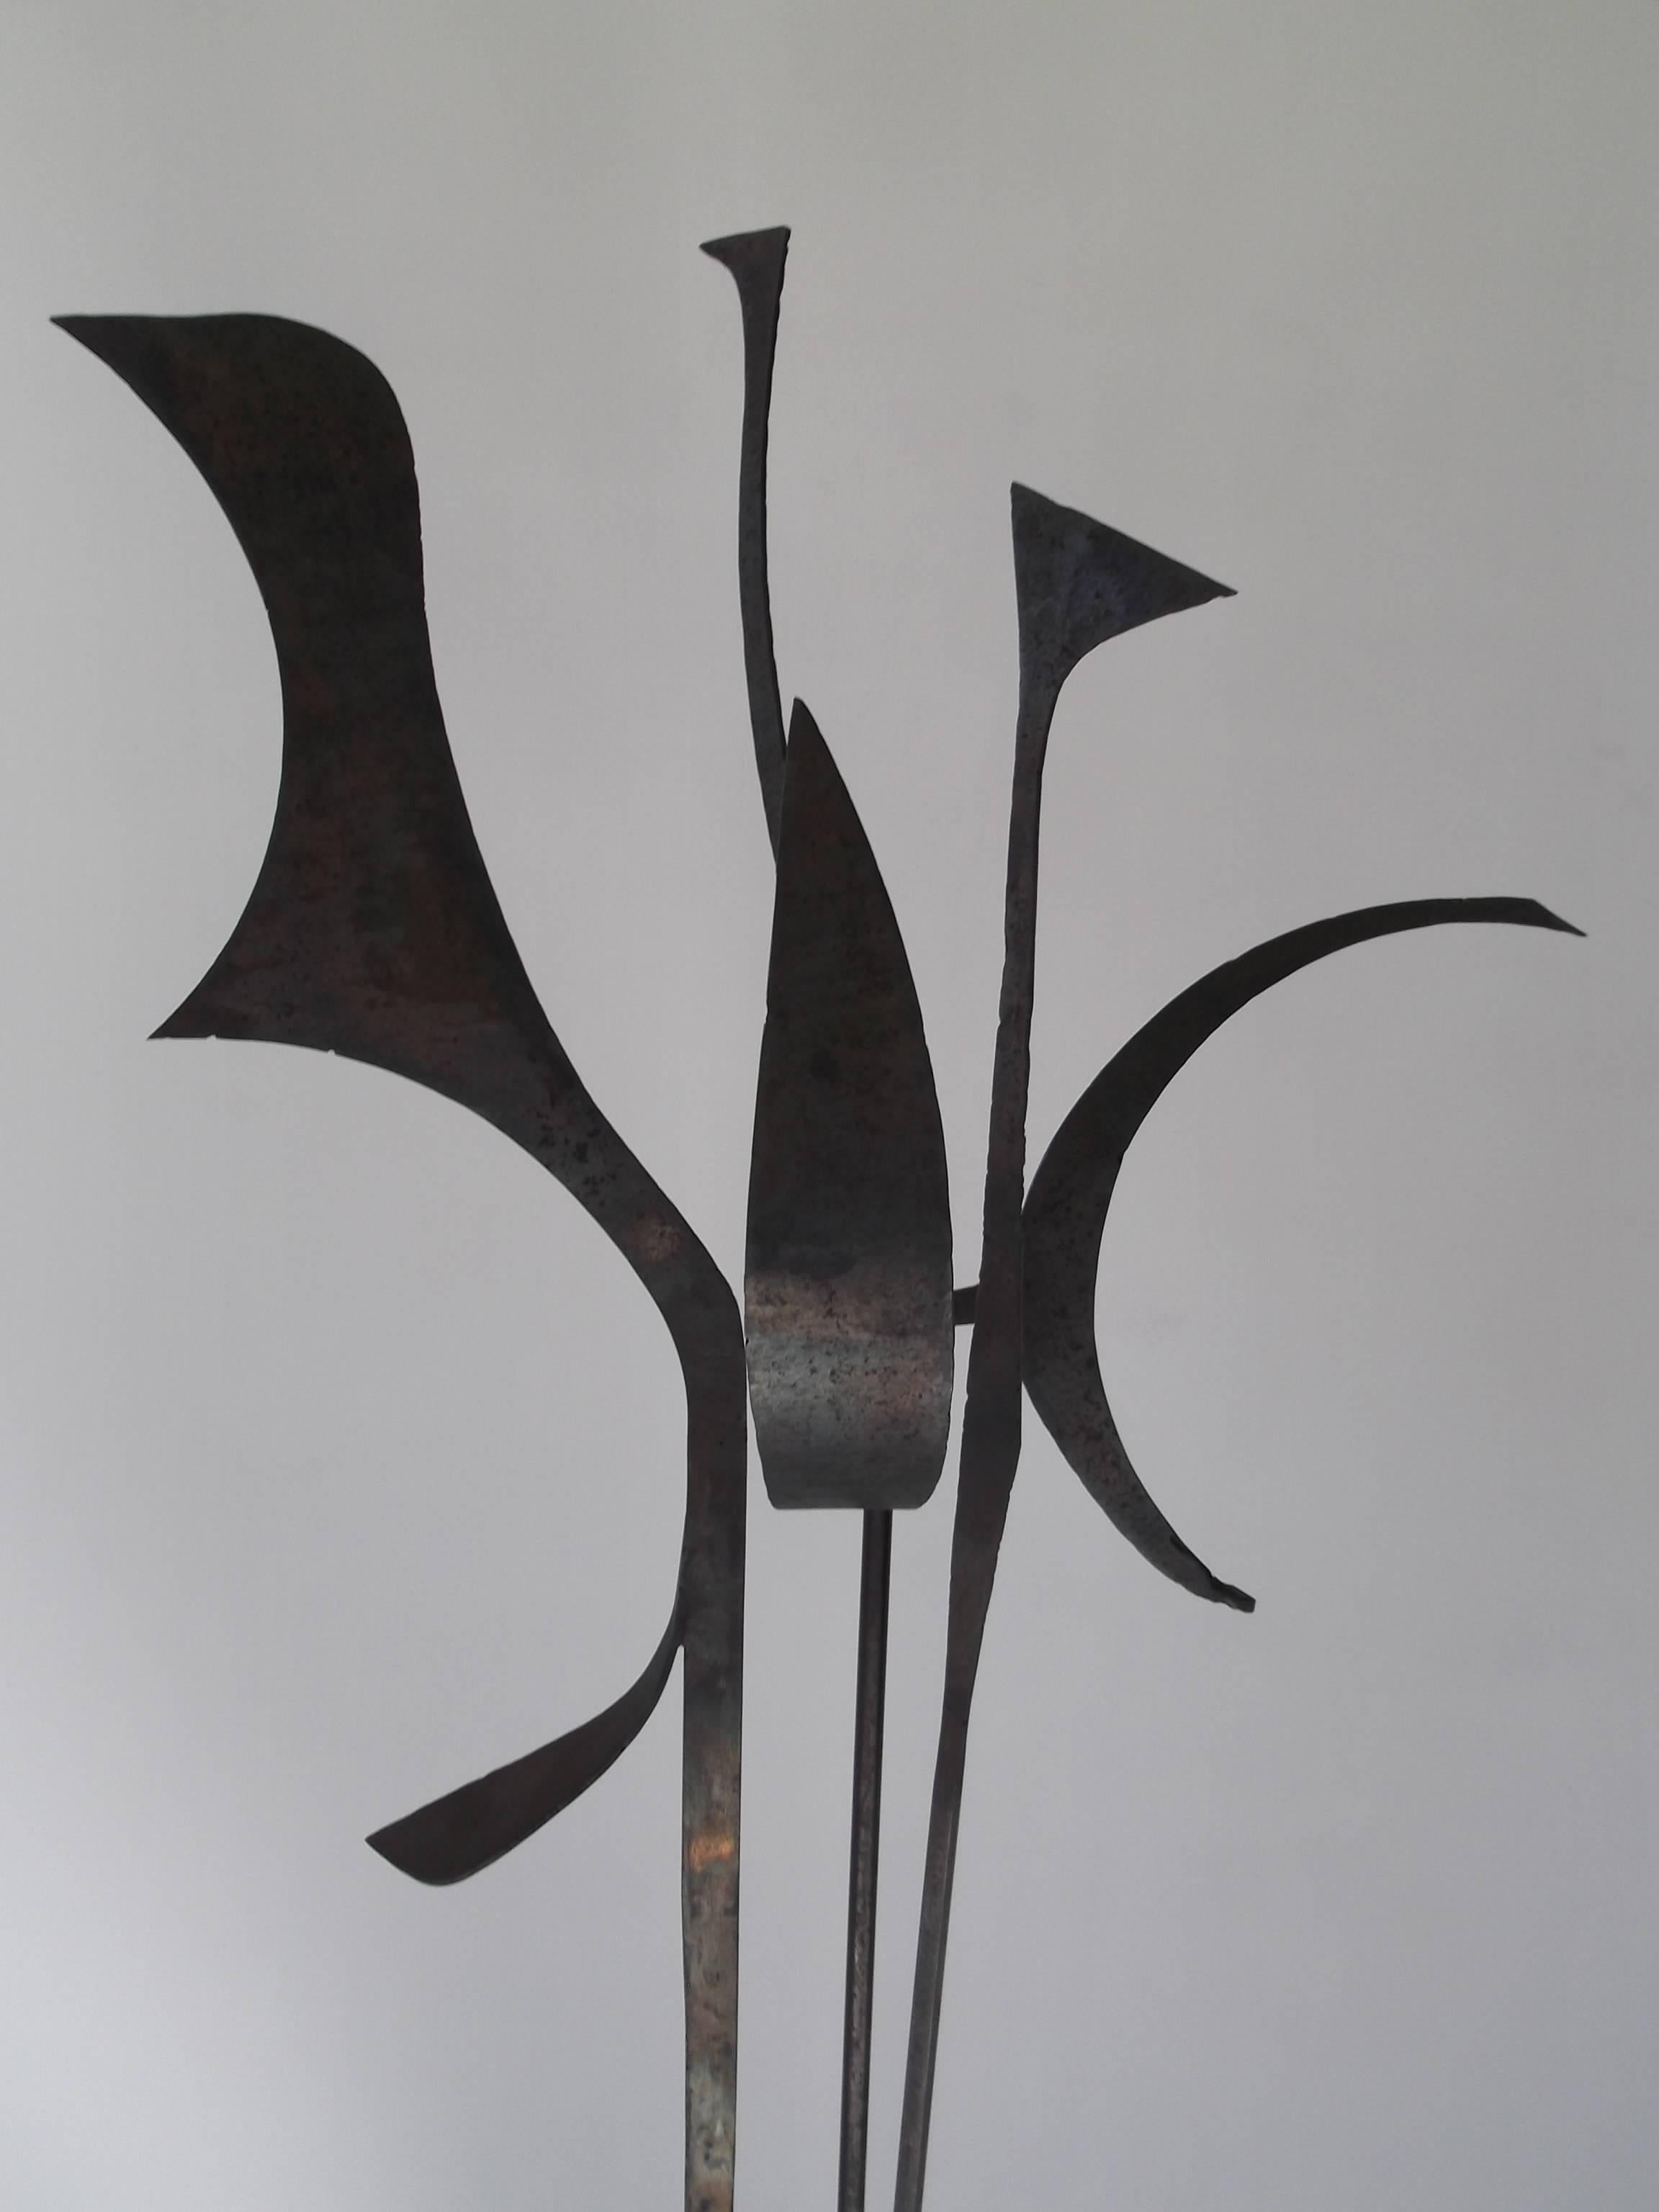 Mid-Century Modern Signed 1963 Jay J. McVicker Abstract Modernist Tall Welded Steel Sculpture For Sale